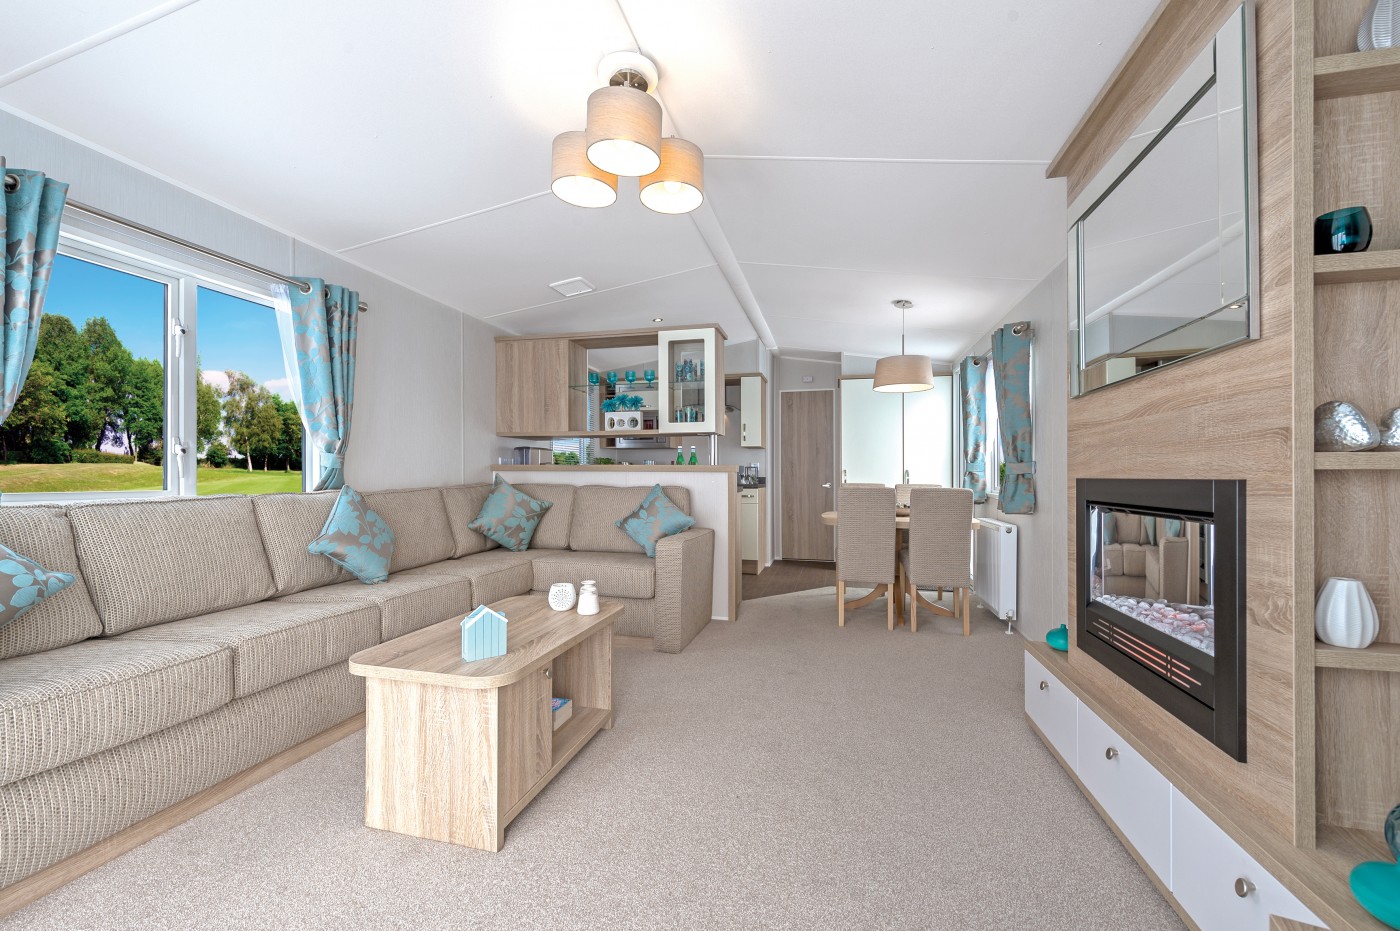 The 2015 Willerby Avonmore is close to the River Tummel and is south facing. 
Pet Friendly
Sleeps 6 in three bedrooms
Open plan kitchen/living room layout